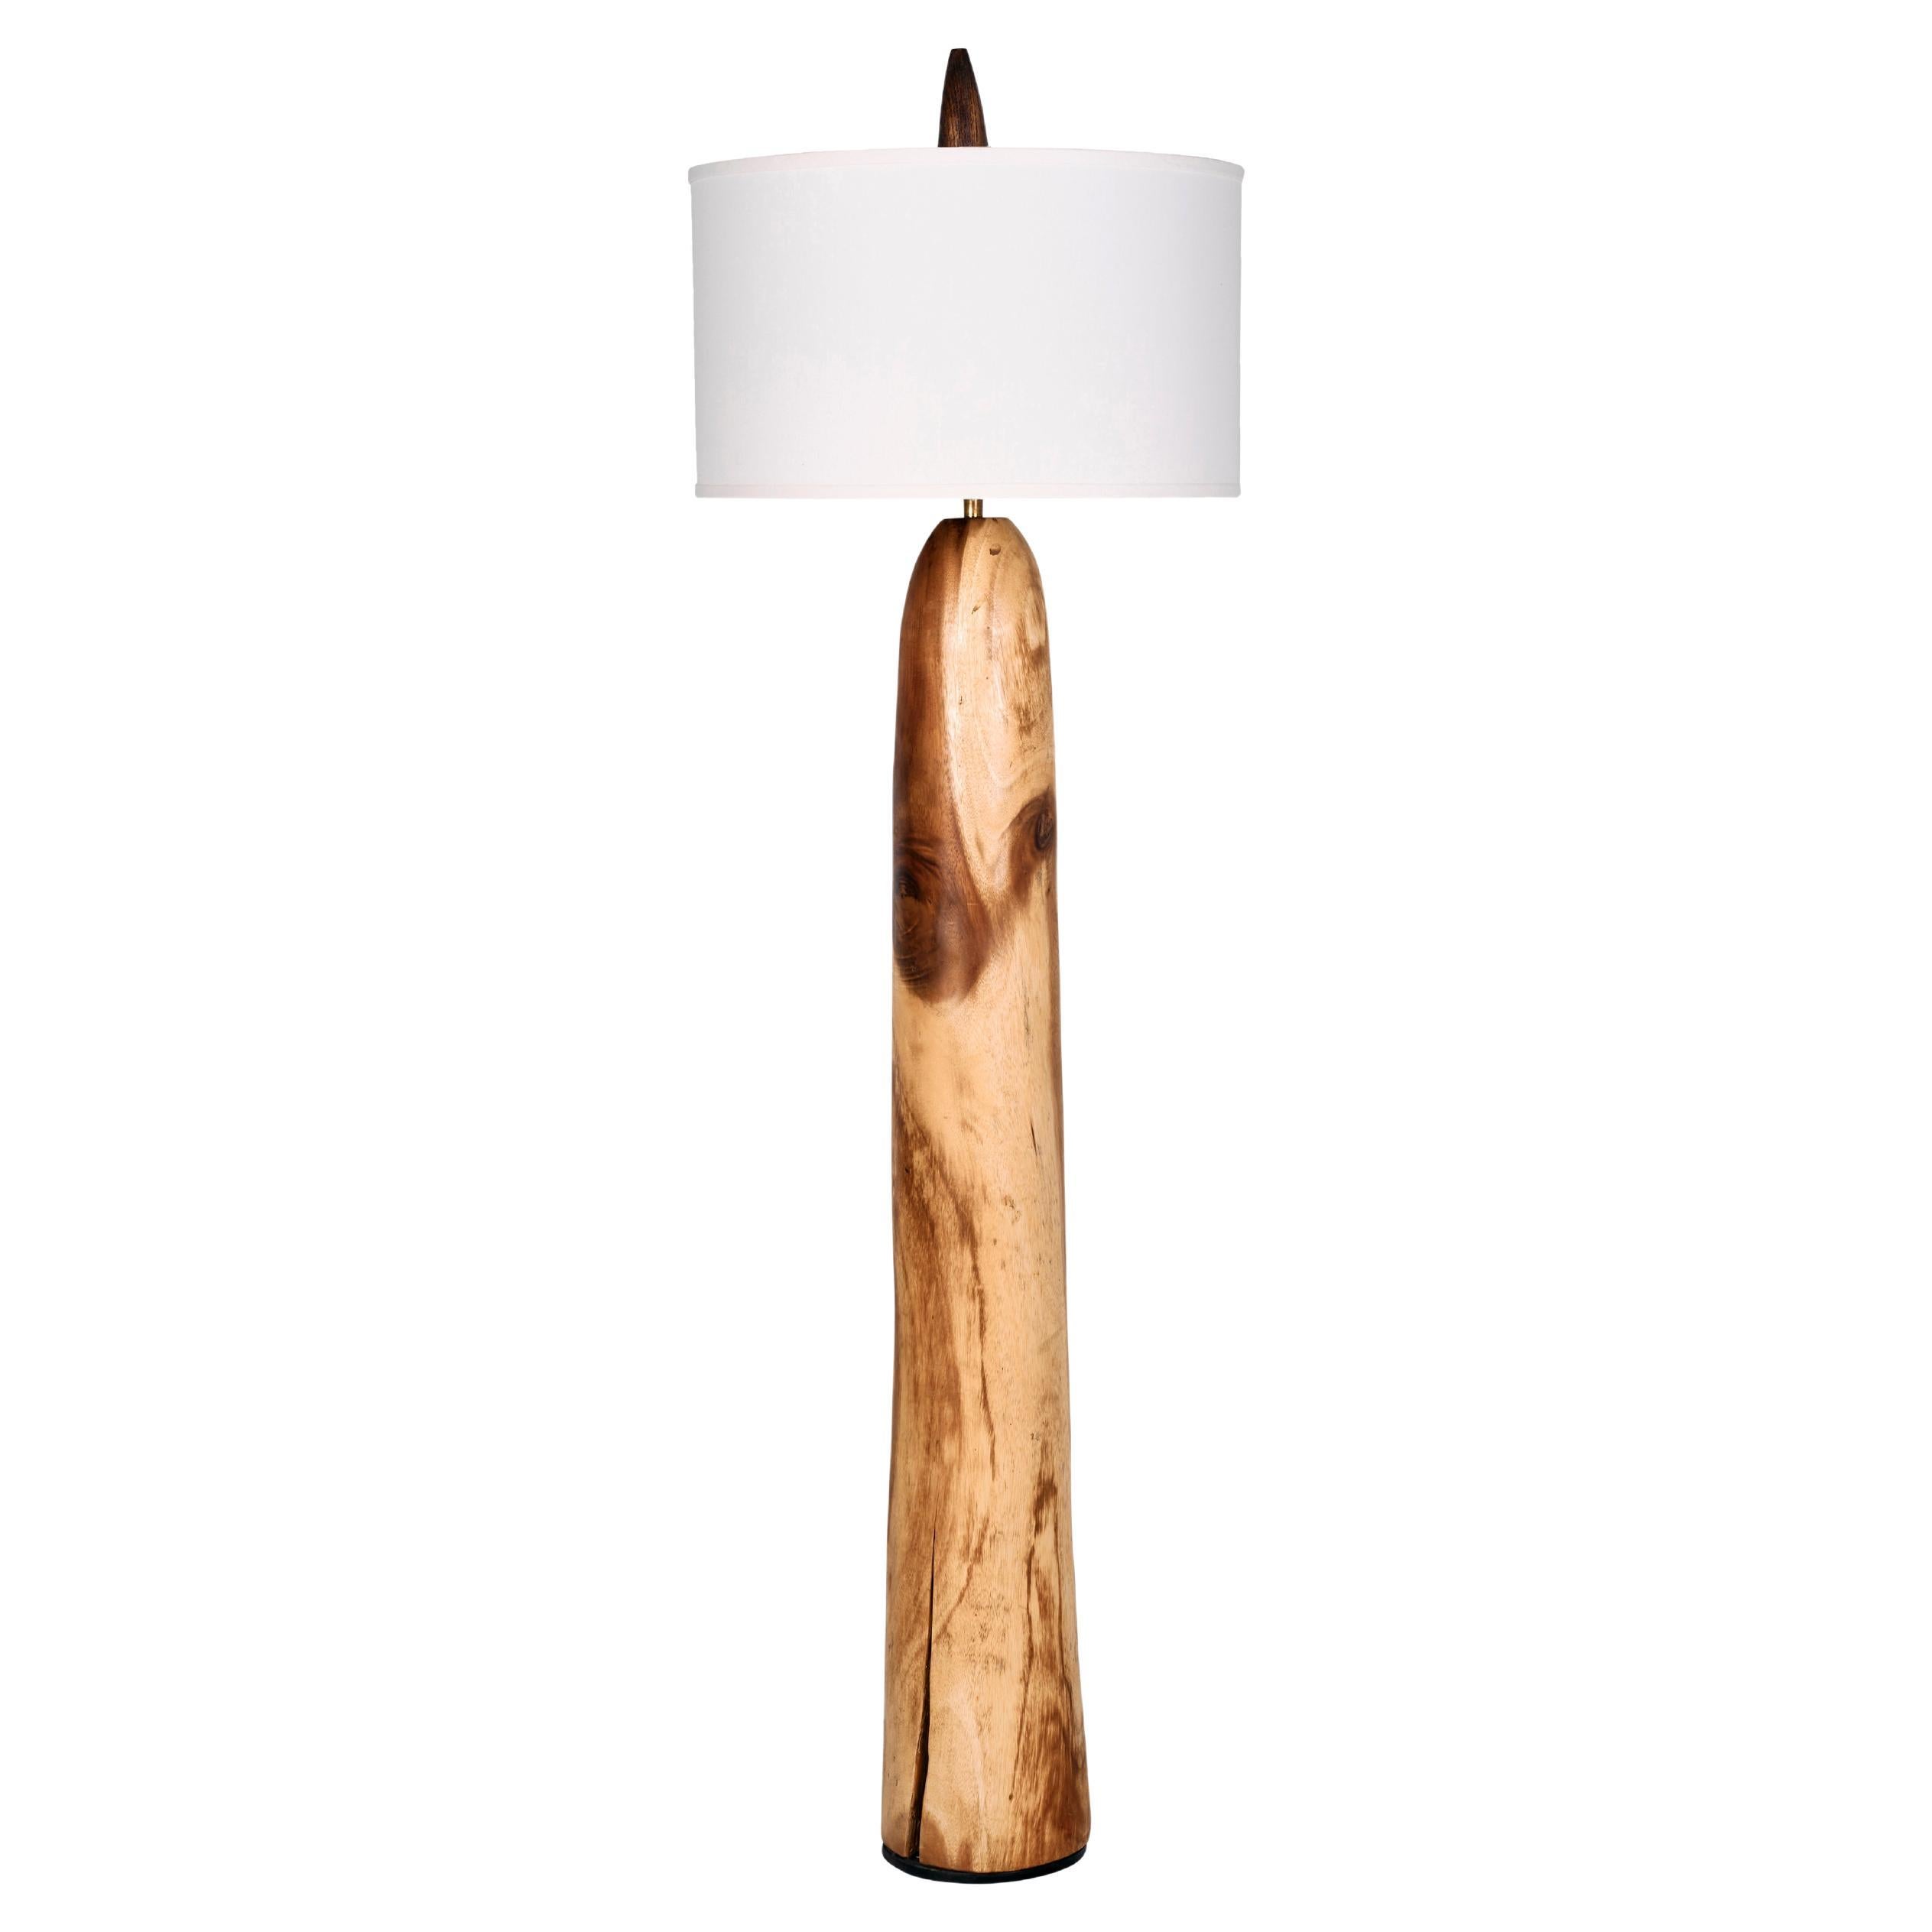 Stehlampe aus Lychee-Holz